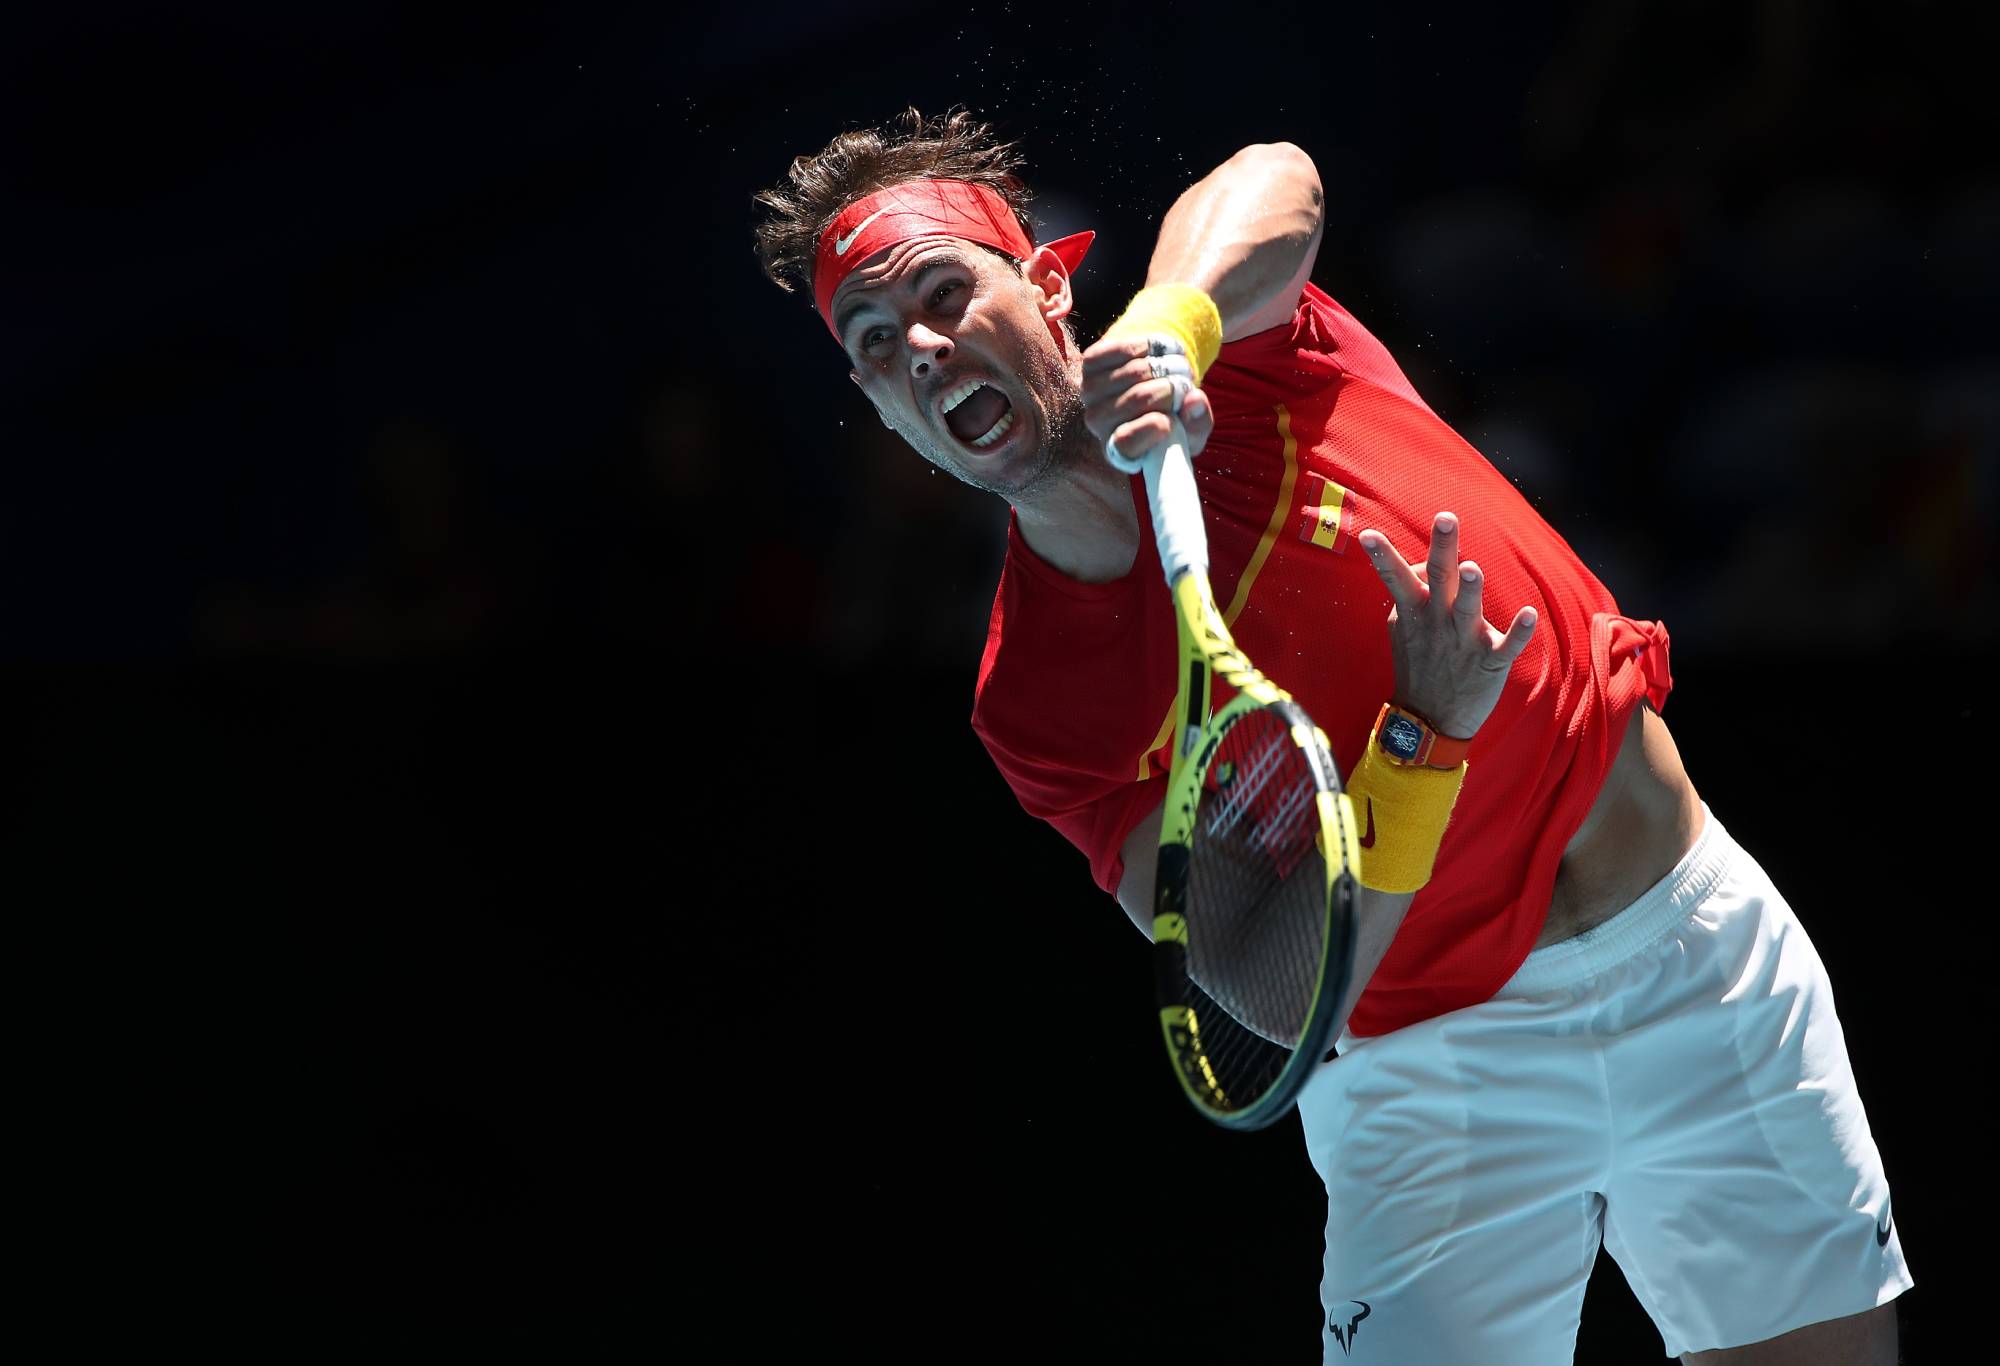 PERTH, AUSTRALIA - JANUARY 08: Rafael Nadal of Team Spain serves to Yoshihito Nishioka of Team Japan during day six of the 2020 ATP Cup Group Stage at RAC Arena on January 08, 2020 in Perth, Australia. (Photo by Paul Kane/Getty Images)